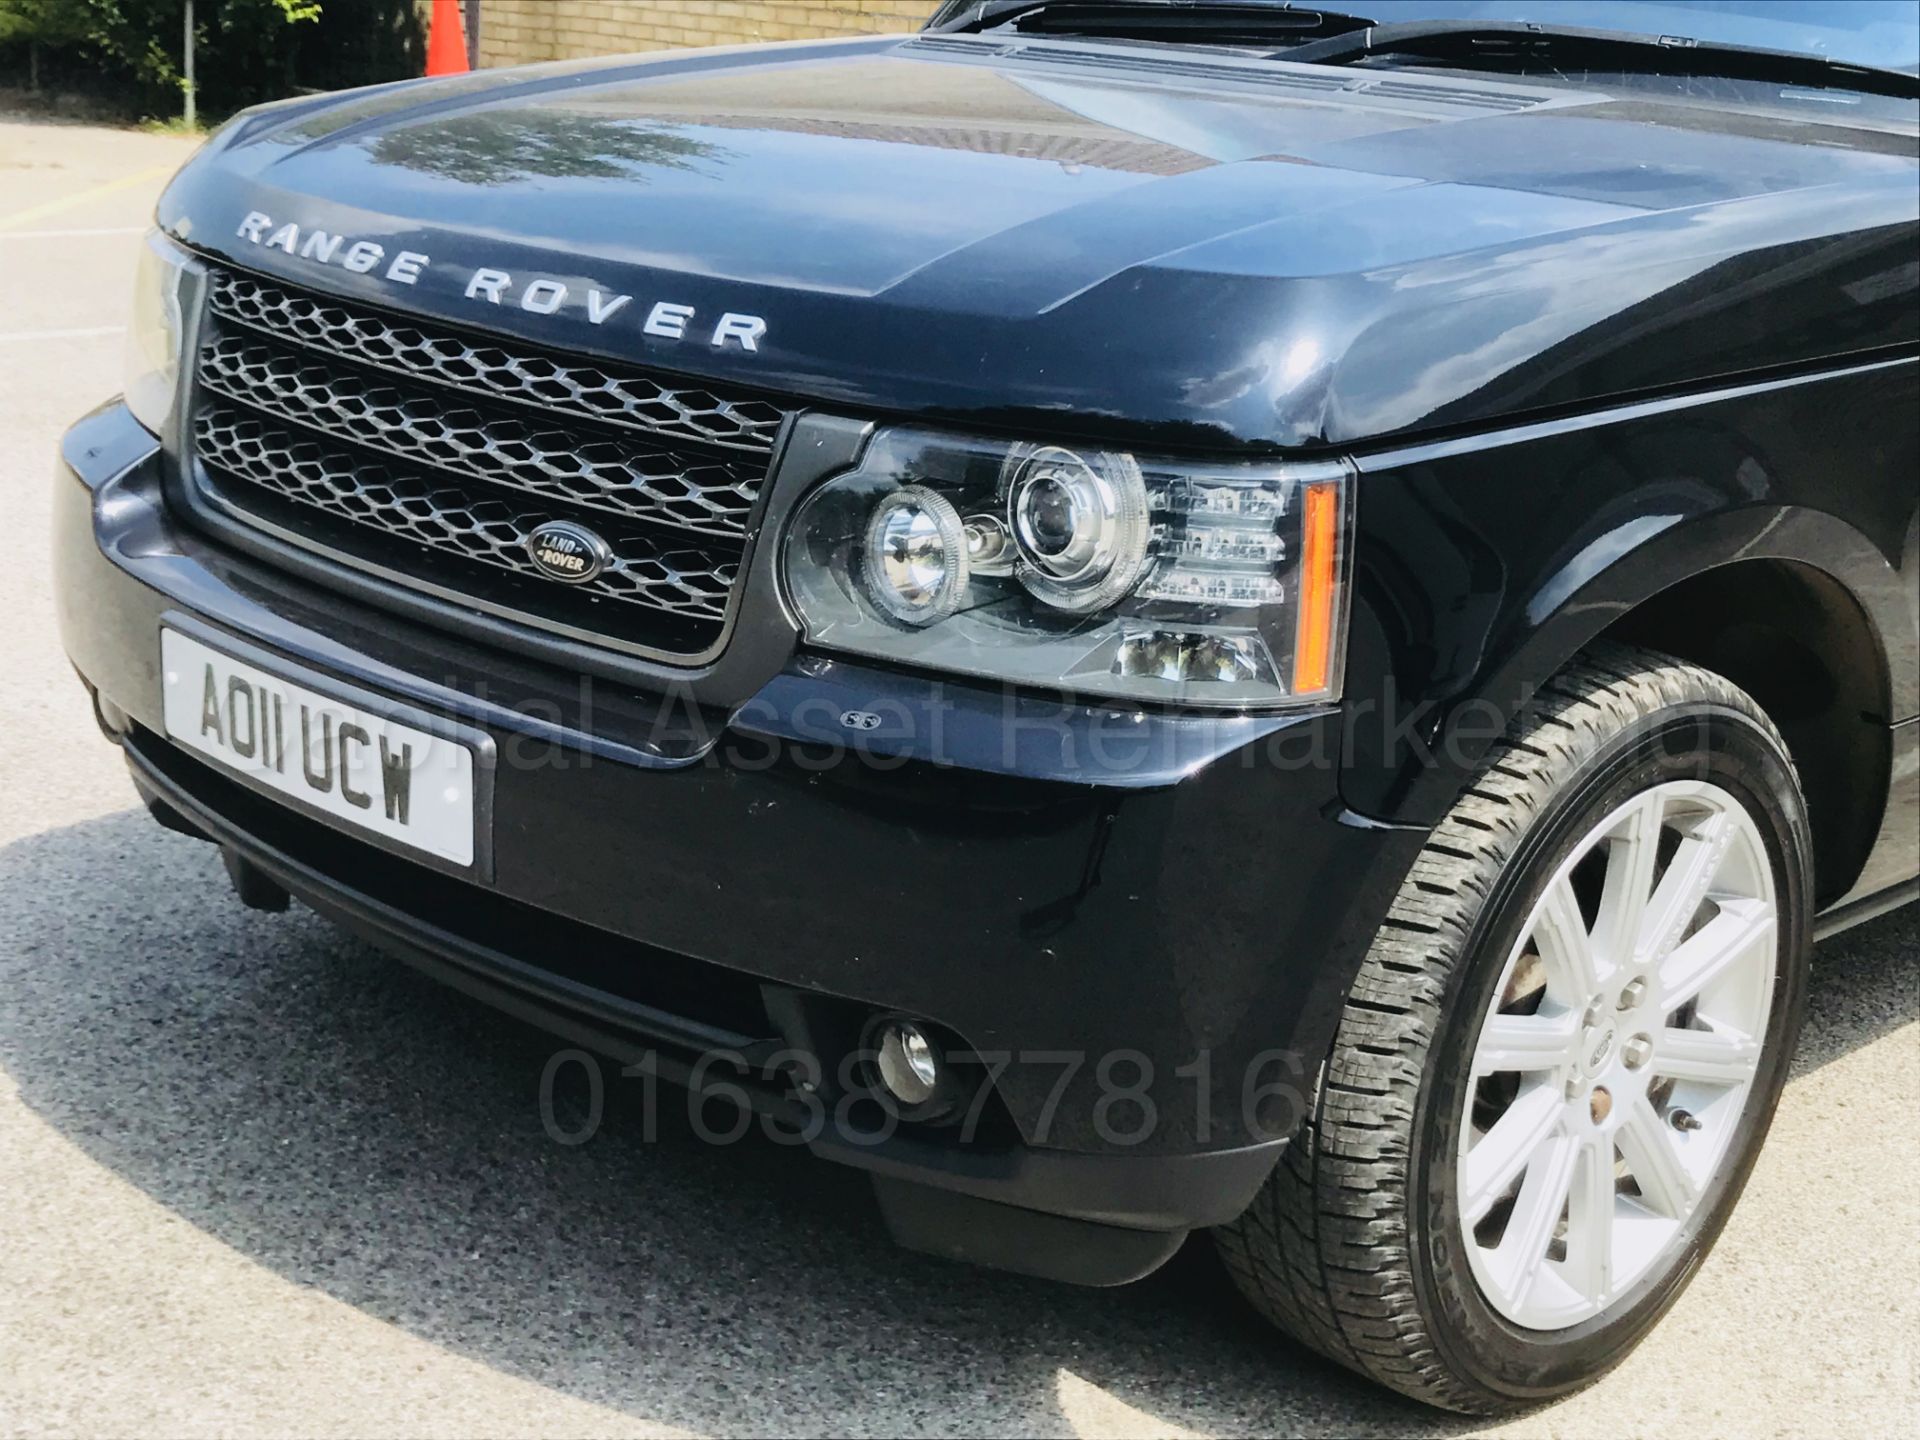 (On Sale) RANGE ROVER VOGUE SE (2011) 'TDV8 -8 SPEED AUTO' **FULLY LOADED** (1 OWNER - FULL HISTORY) - Image 17 of 60